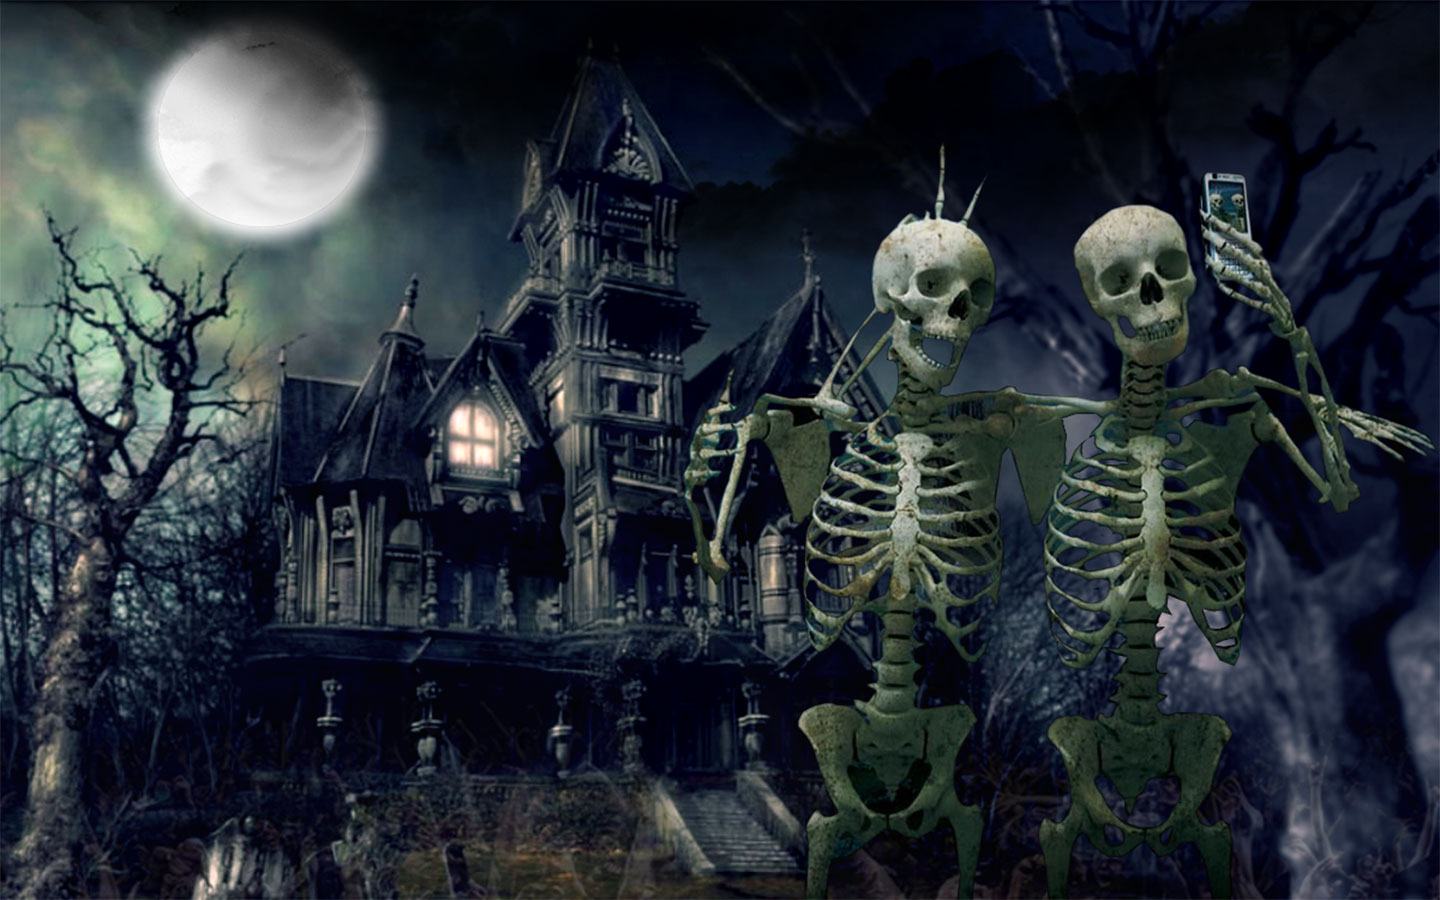  Wallpapers Backgrounds   Haunted House Skeletons wallpaper 1440x900